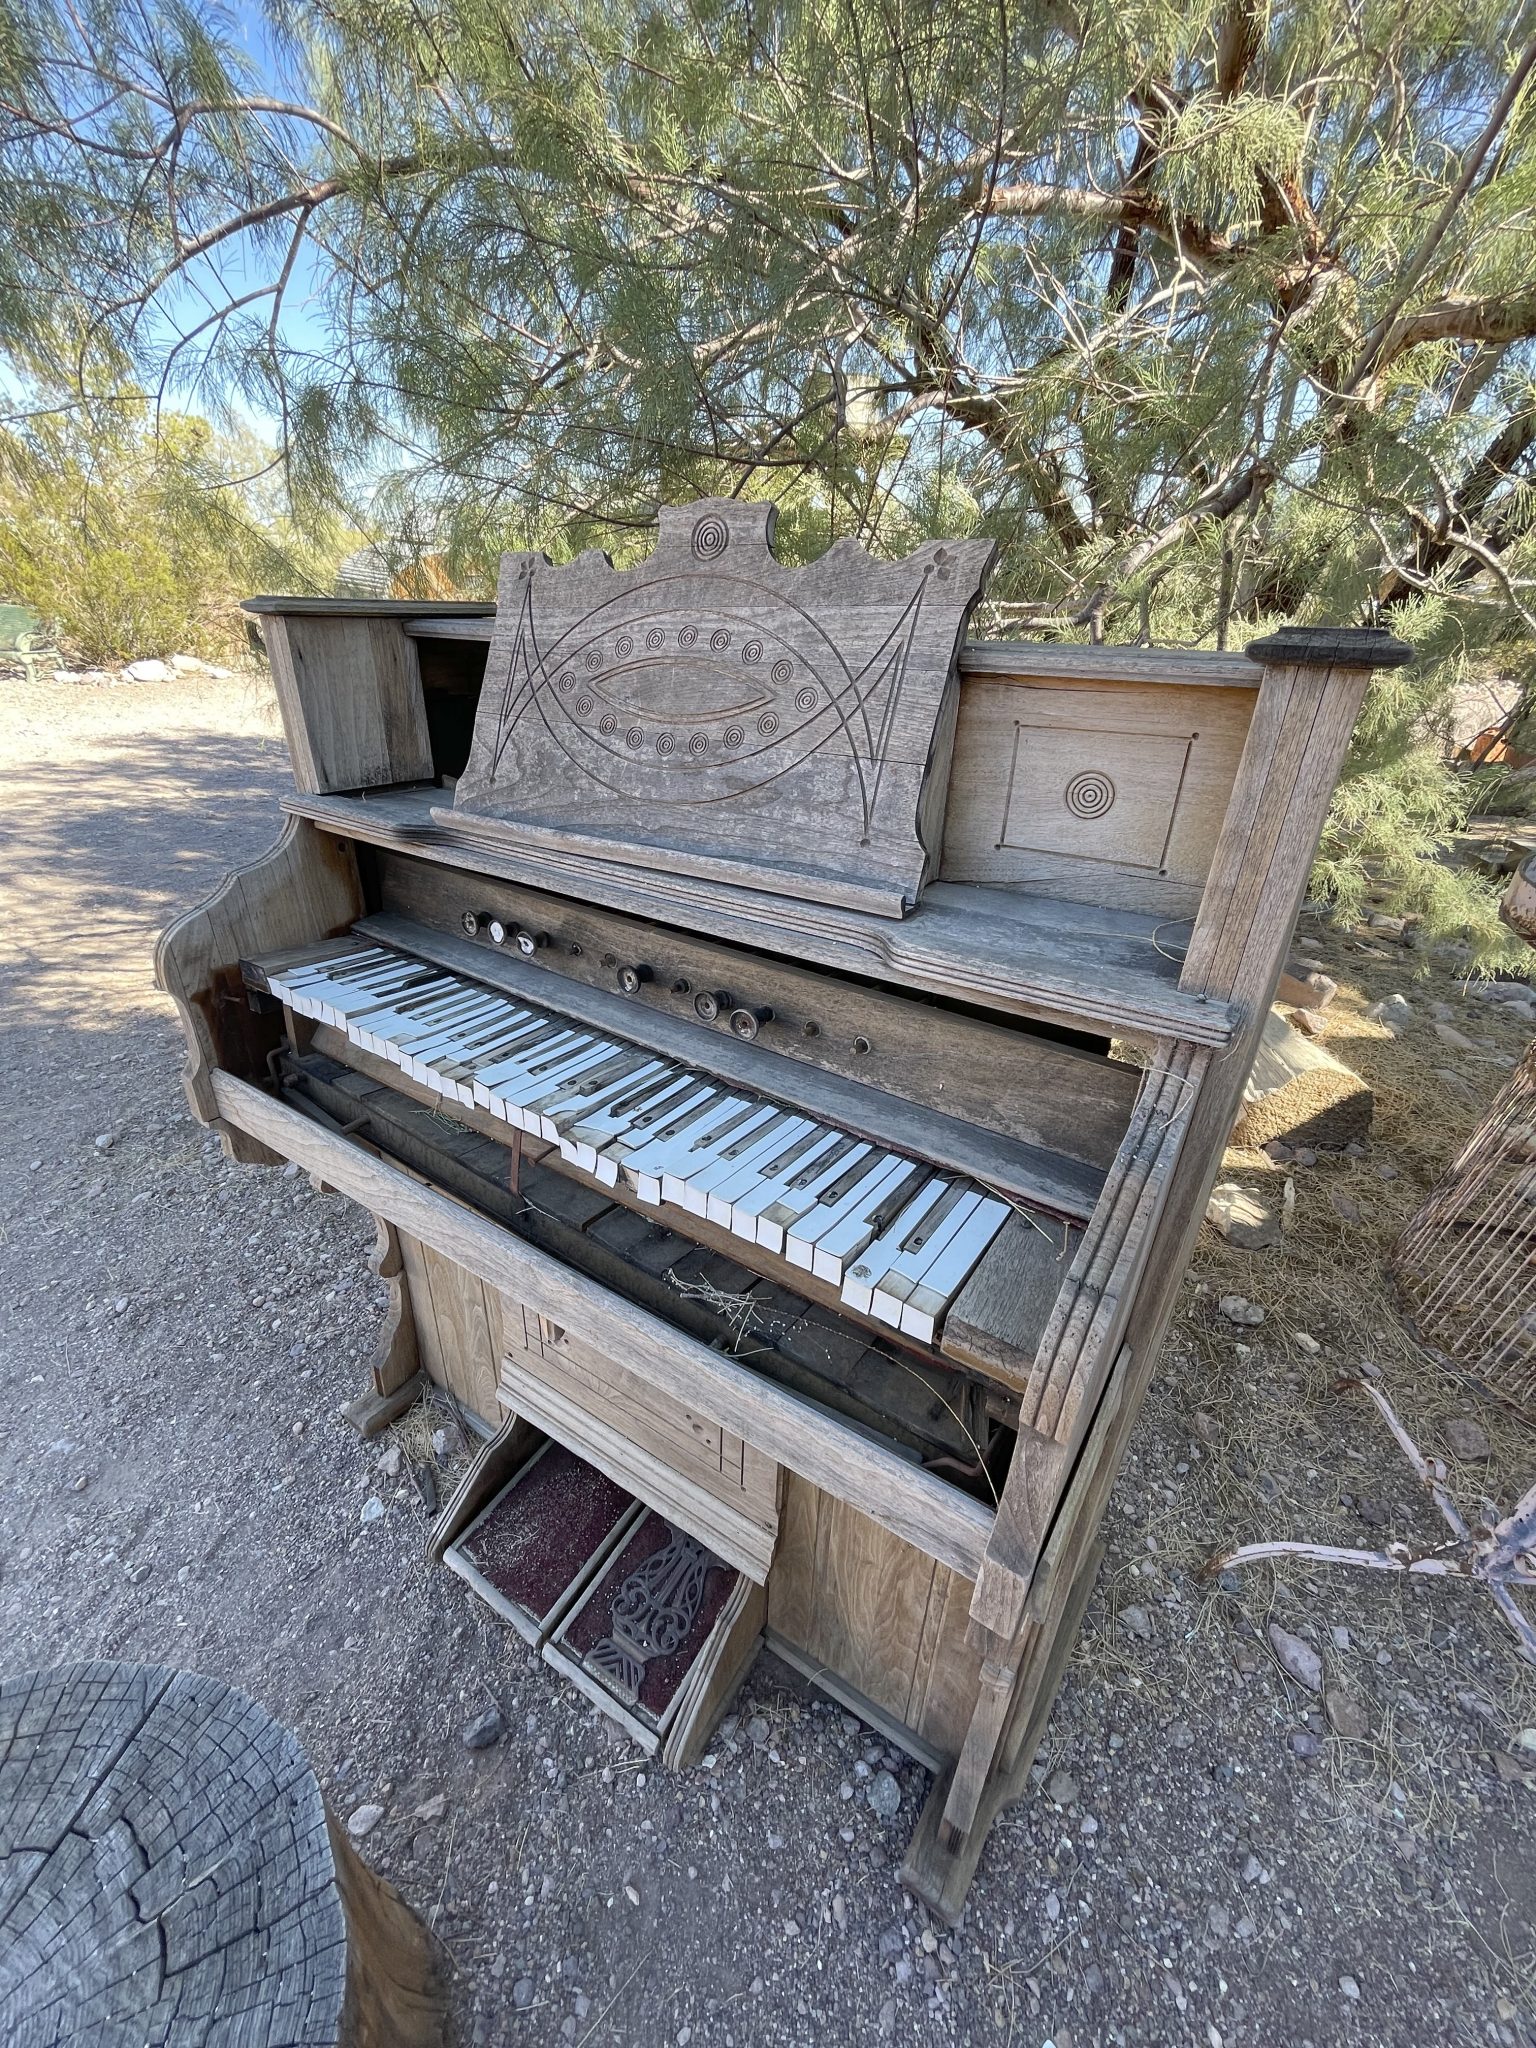 Nelson-ghost-town-piano-visite-las-vegas-aventures